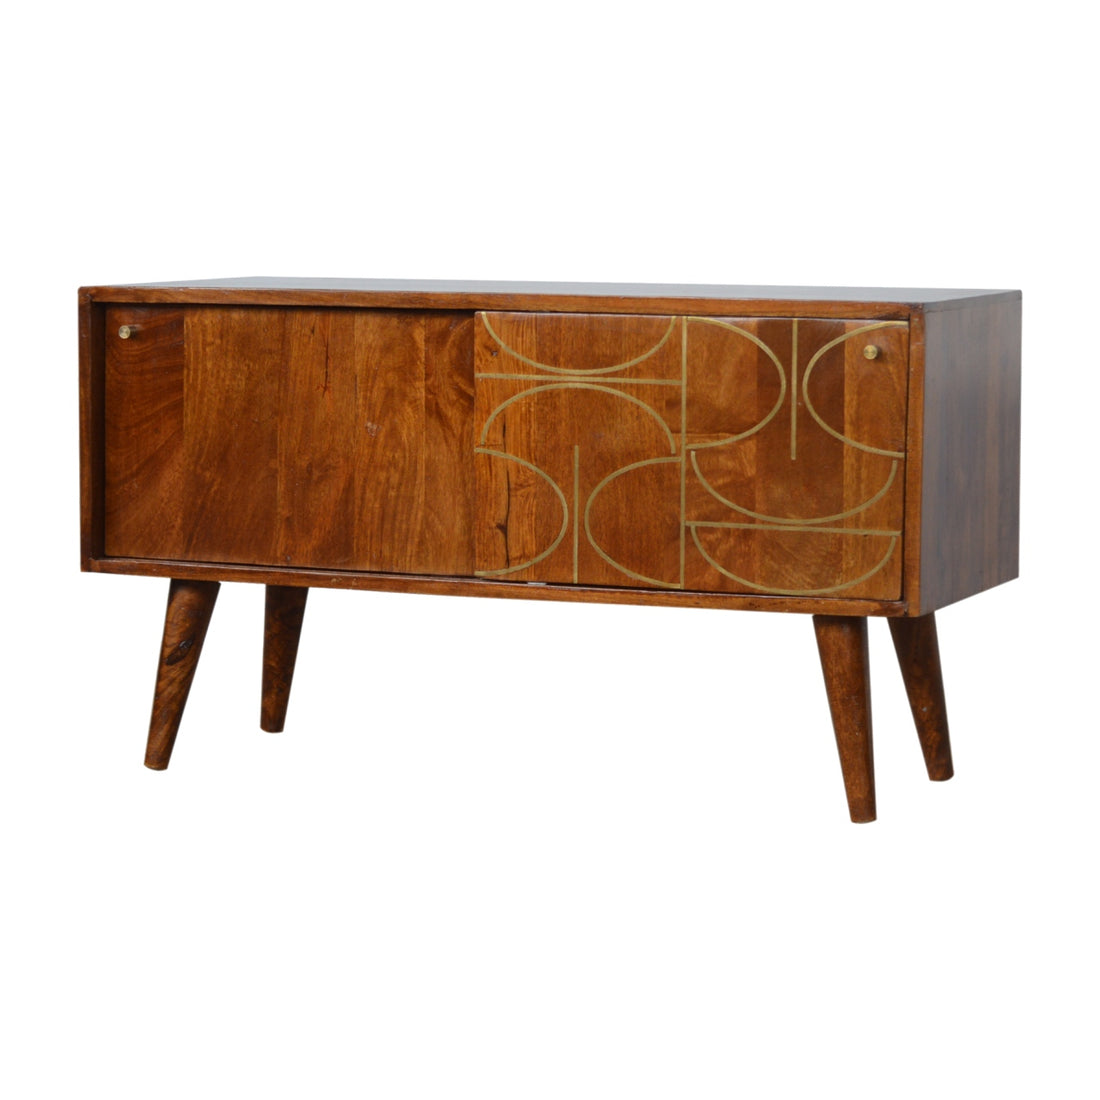 Chestnut Abstract Inlay Sideboard